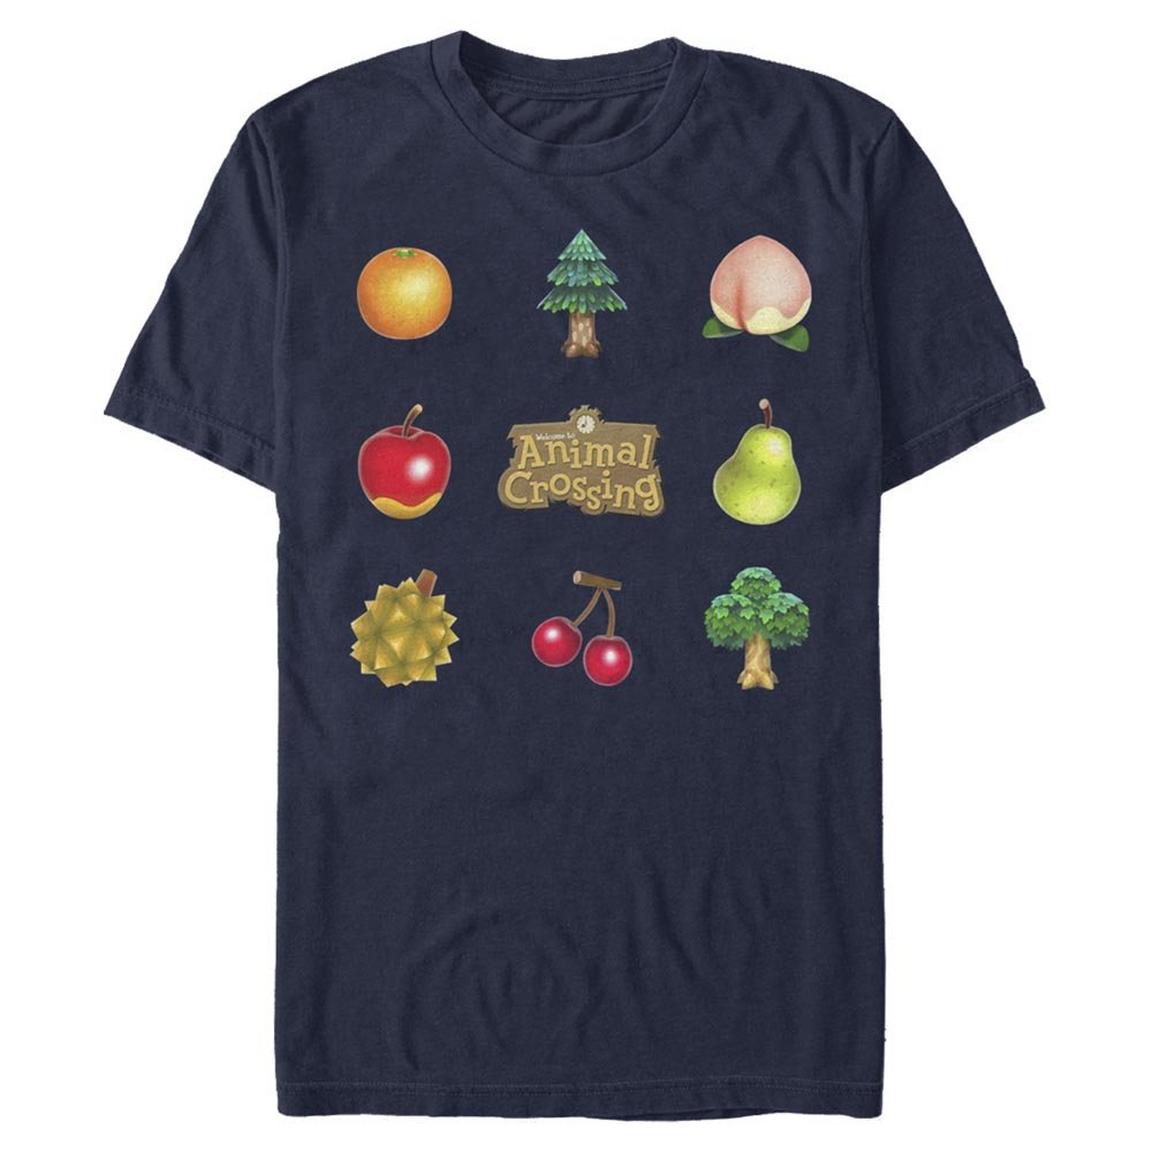 Animal Crossing Items T-Shirt, Size: Large, Fifth Sun